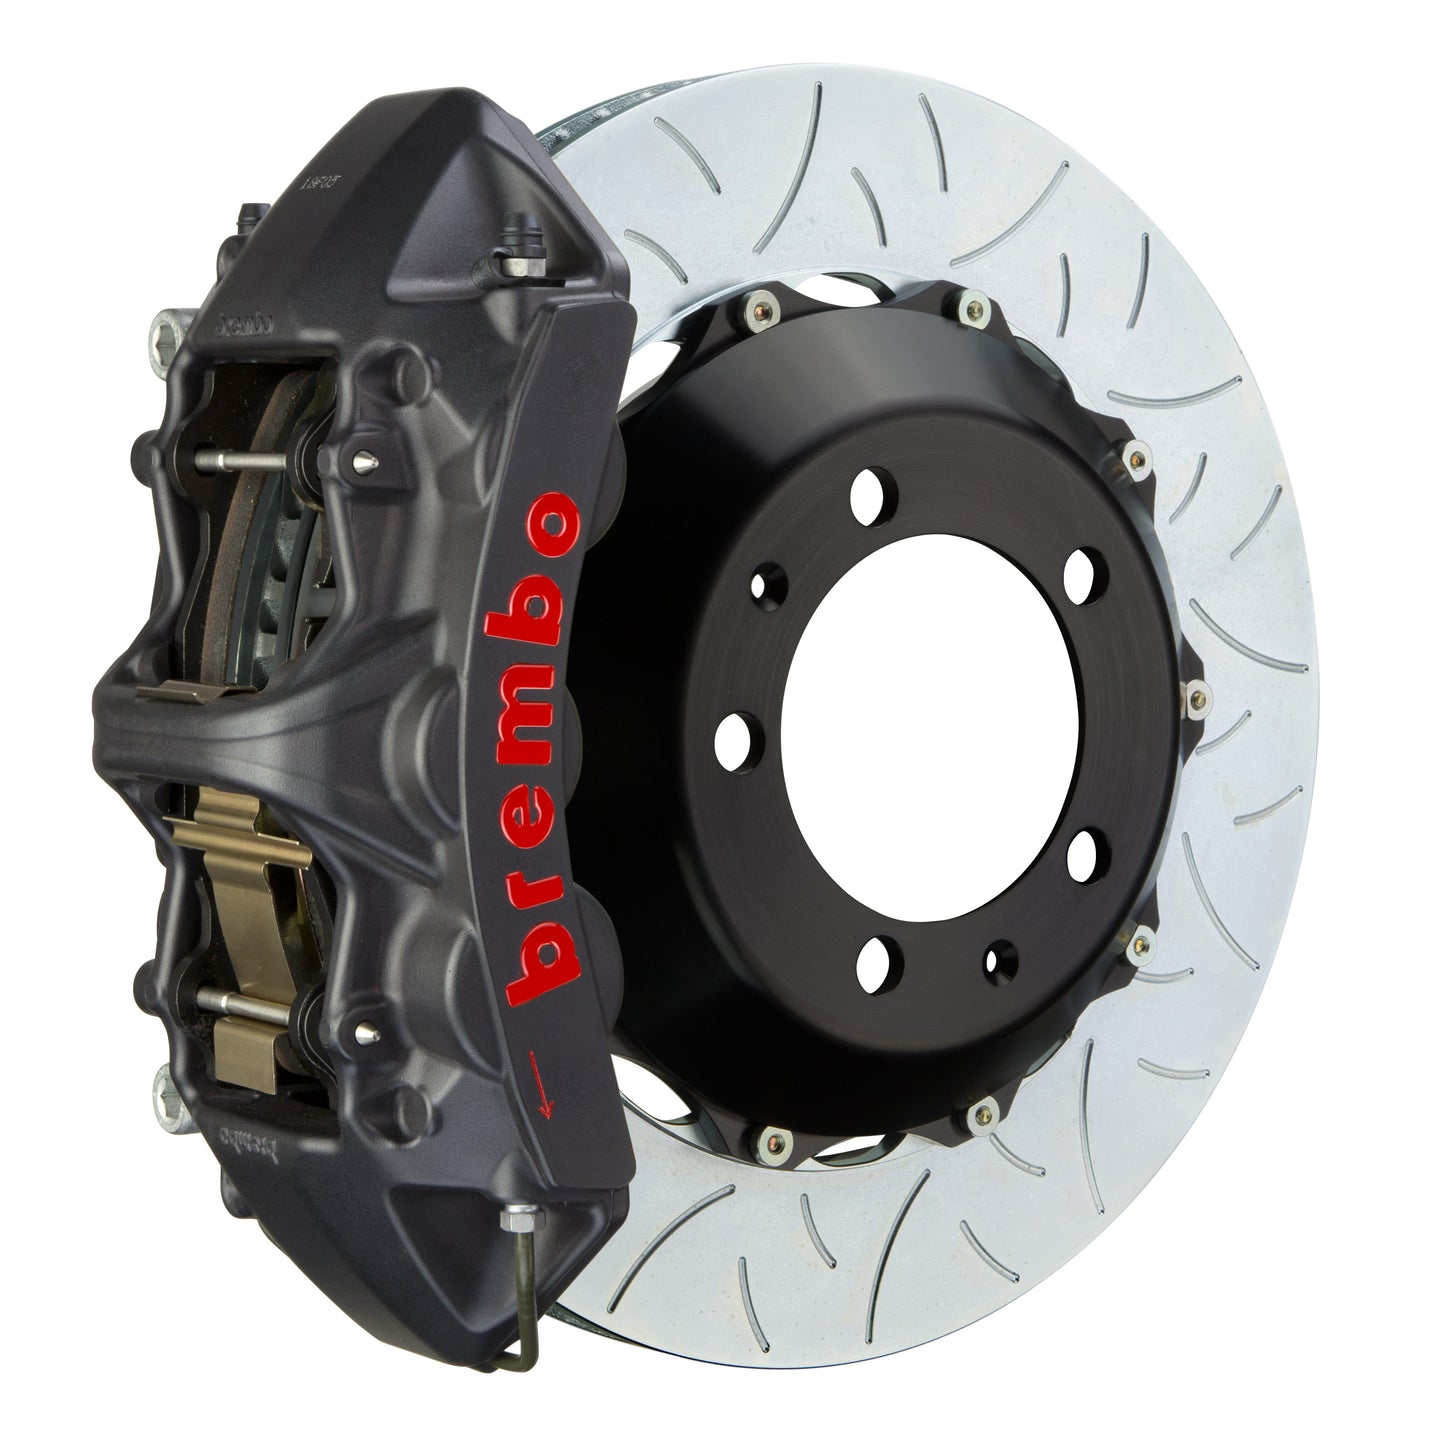 Front Brembo Gran Turismo Braking Upgrade Kit (1M19041AS) GT / S6 Caliper with 6-Pistons & 2-piece 380x32 Disc